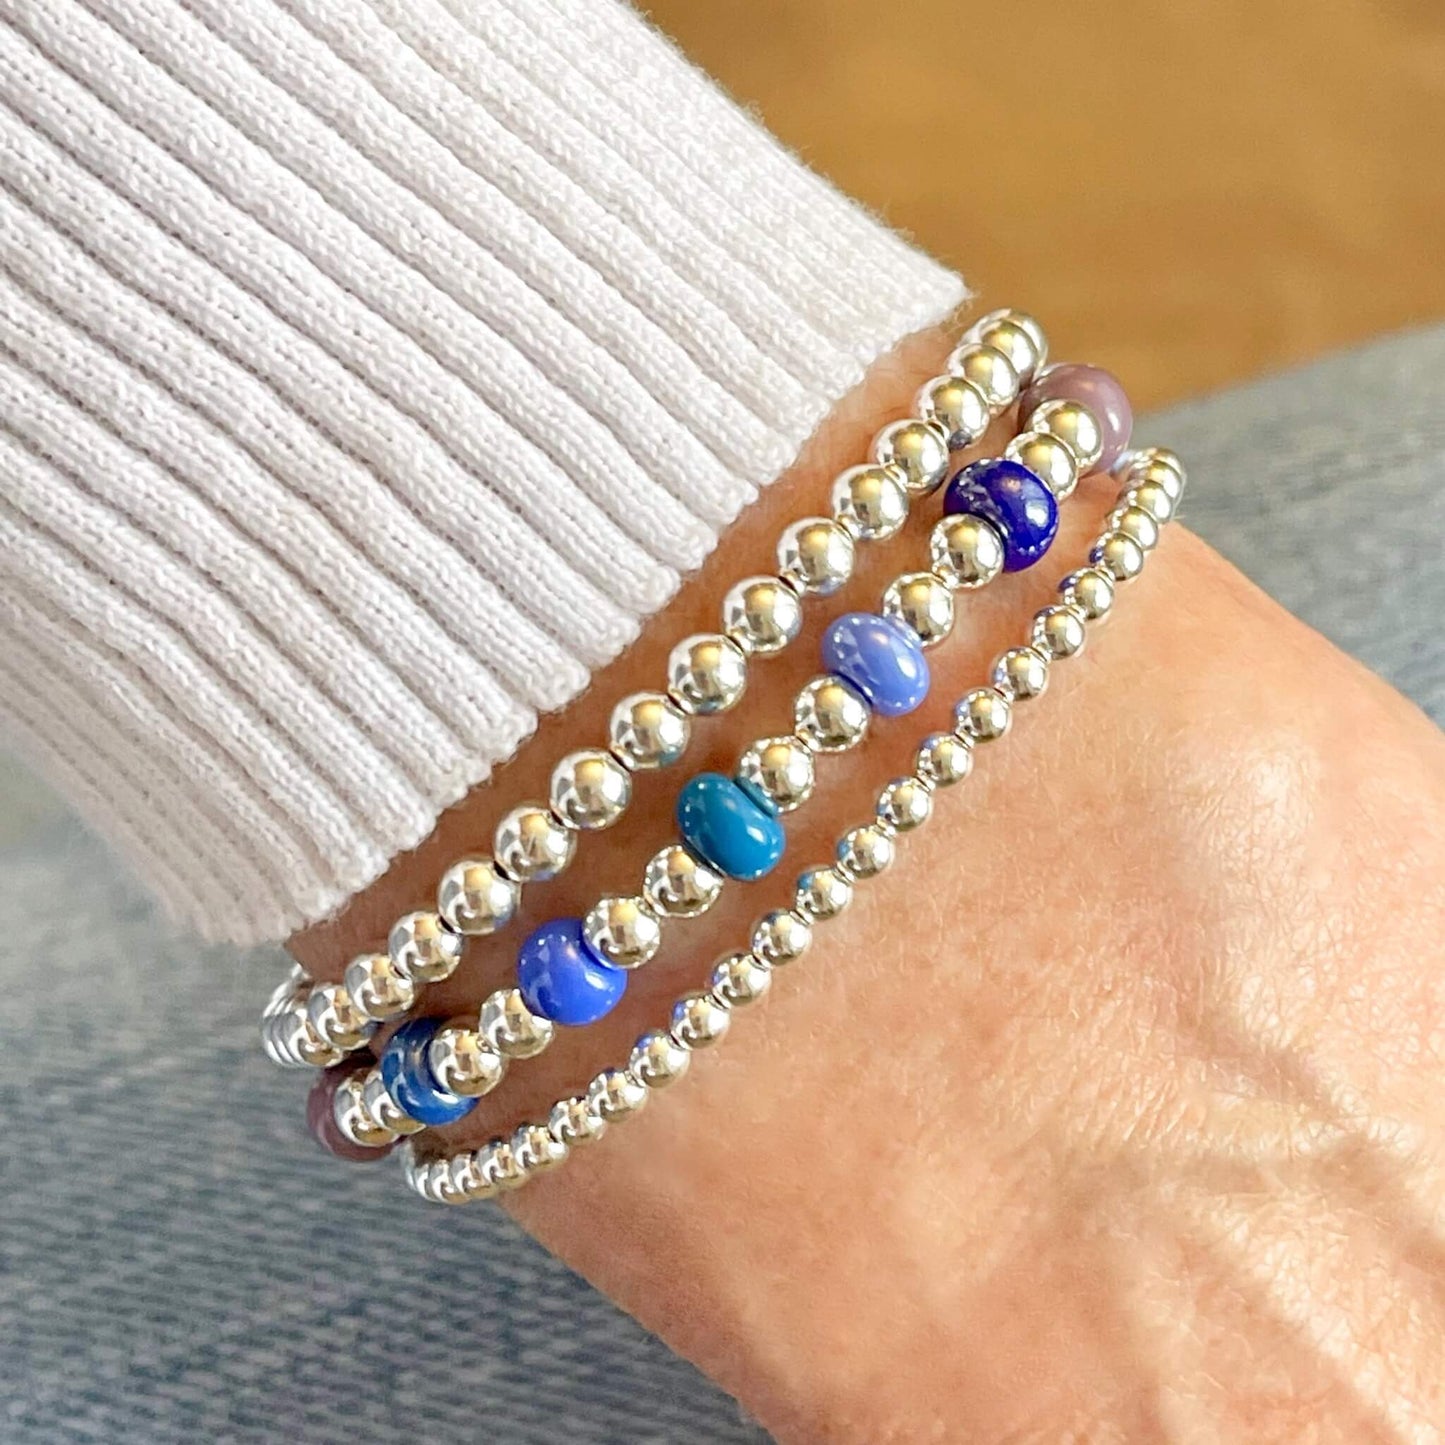 Set of 3 Monochromatic Beaded Stretch Bracelets in Silver and Shades of Blue & Plum.